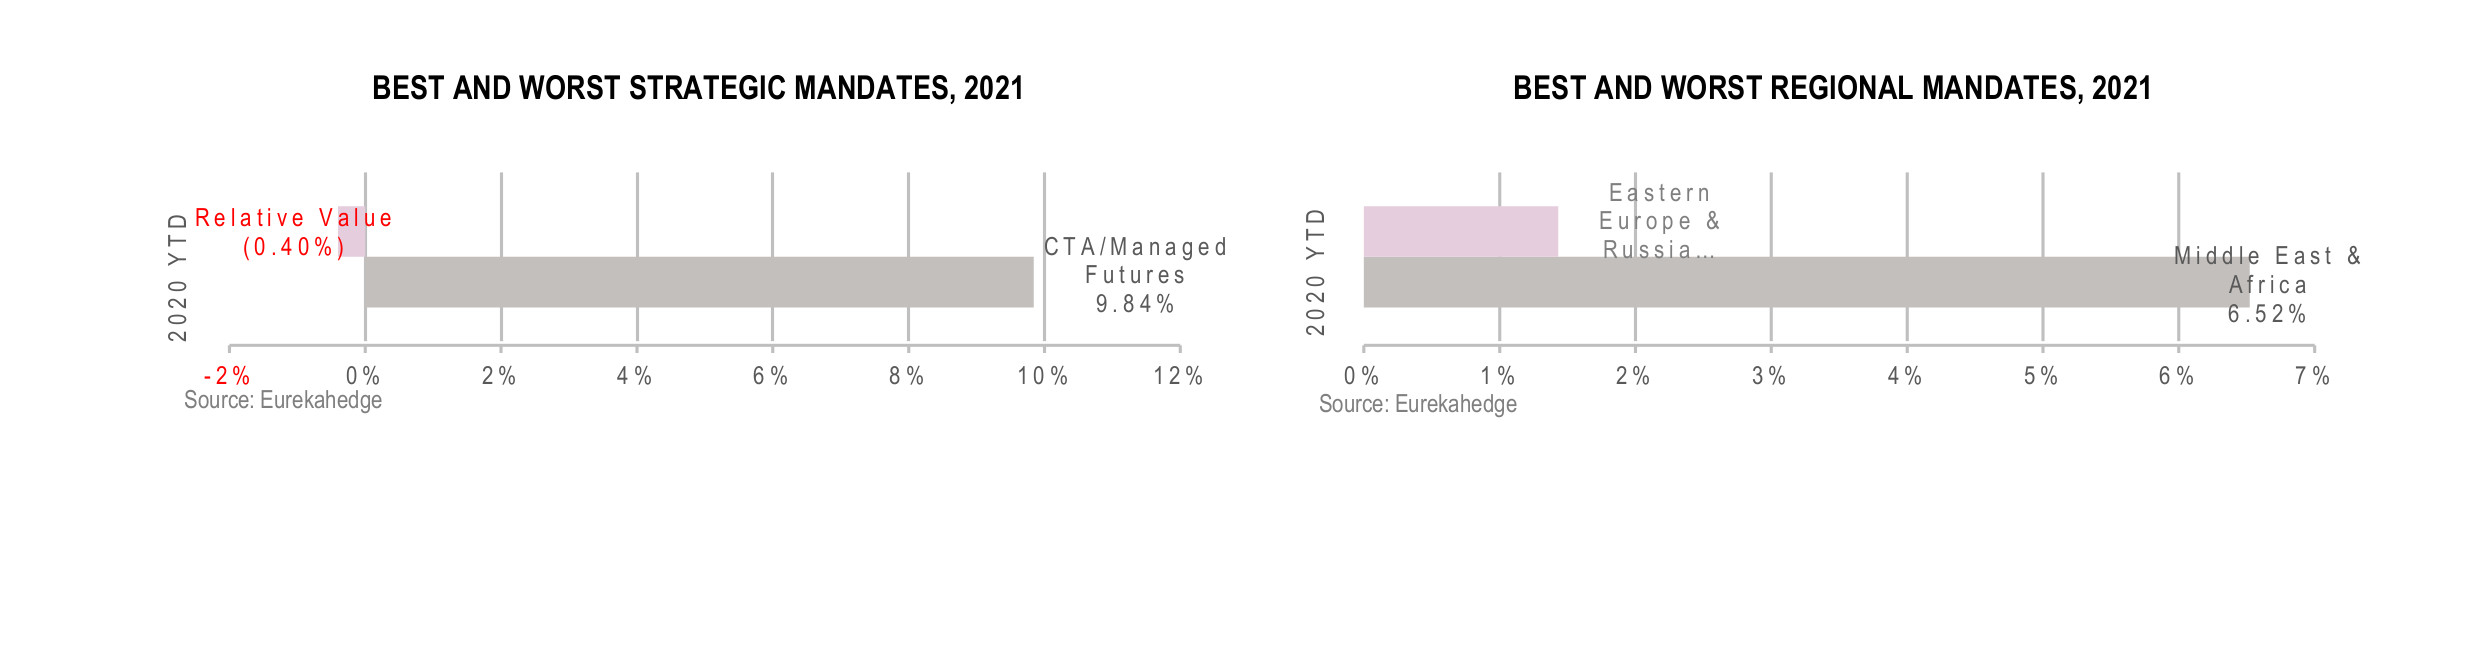 European Hedge Funds Infographic May 2021 - best and worst strategy and regional mandate